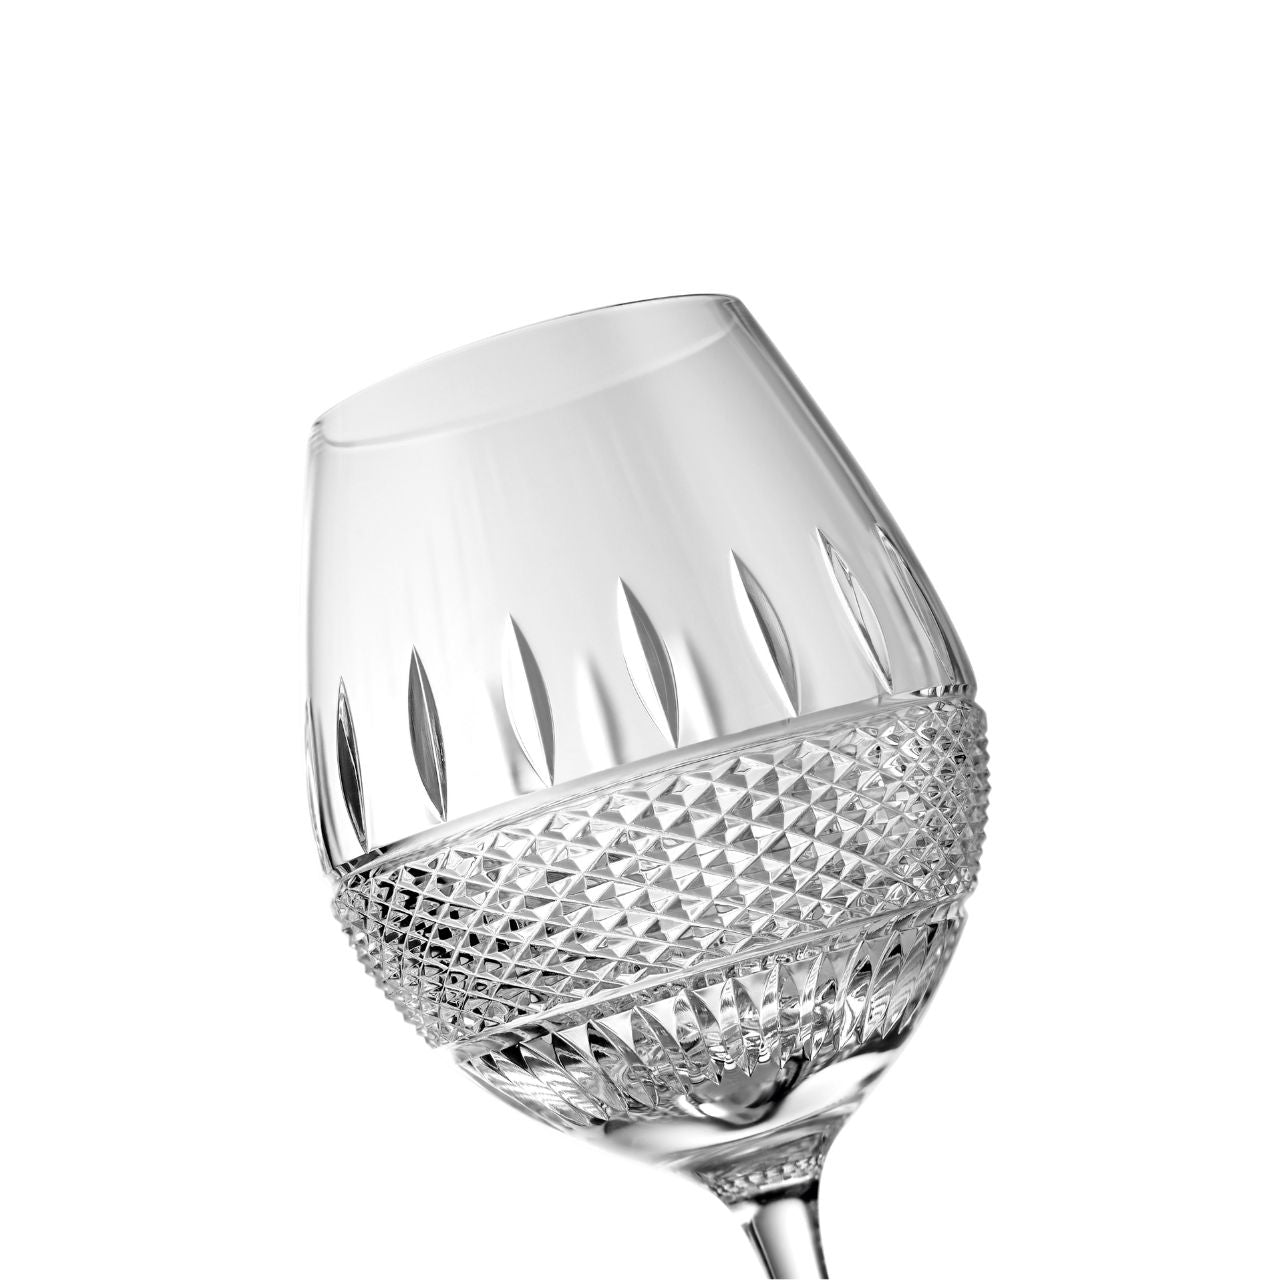 Irish Lace Red Wine Set of 2 by Waterford Crystal  An elegant marriage of form and function, Waterford’s Mastercraft Irish Lace Red Wine glasses are perfect for red wine connoisseurs and those who appreciate the clarity, weight and indulgence of timeless crystal.